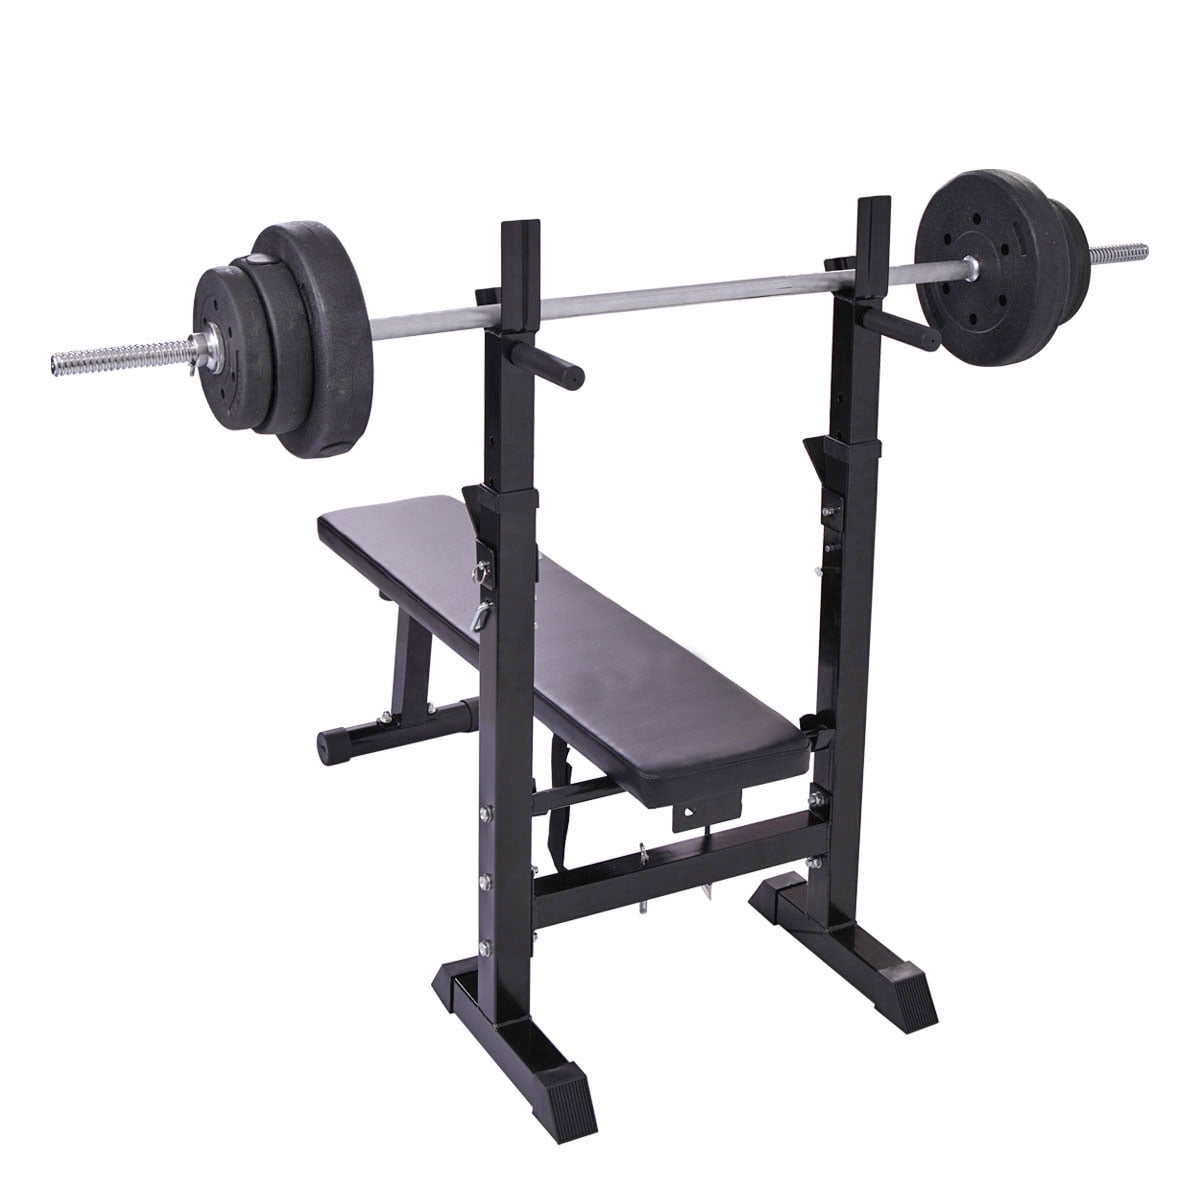 NoxwB Weight Bench Strength Training Adjustable Folding Ab Benches Barbell Lifting Press Workout Fitness Barbell Rack Home Gym Equipment